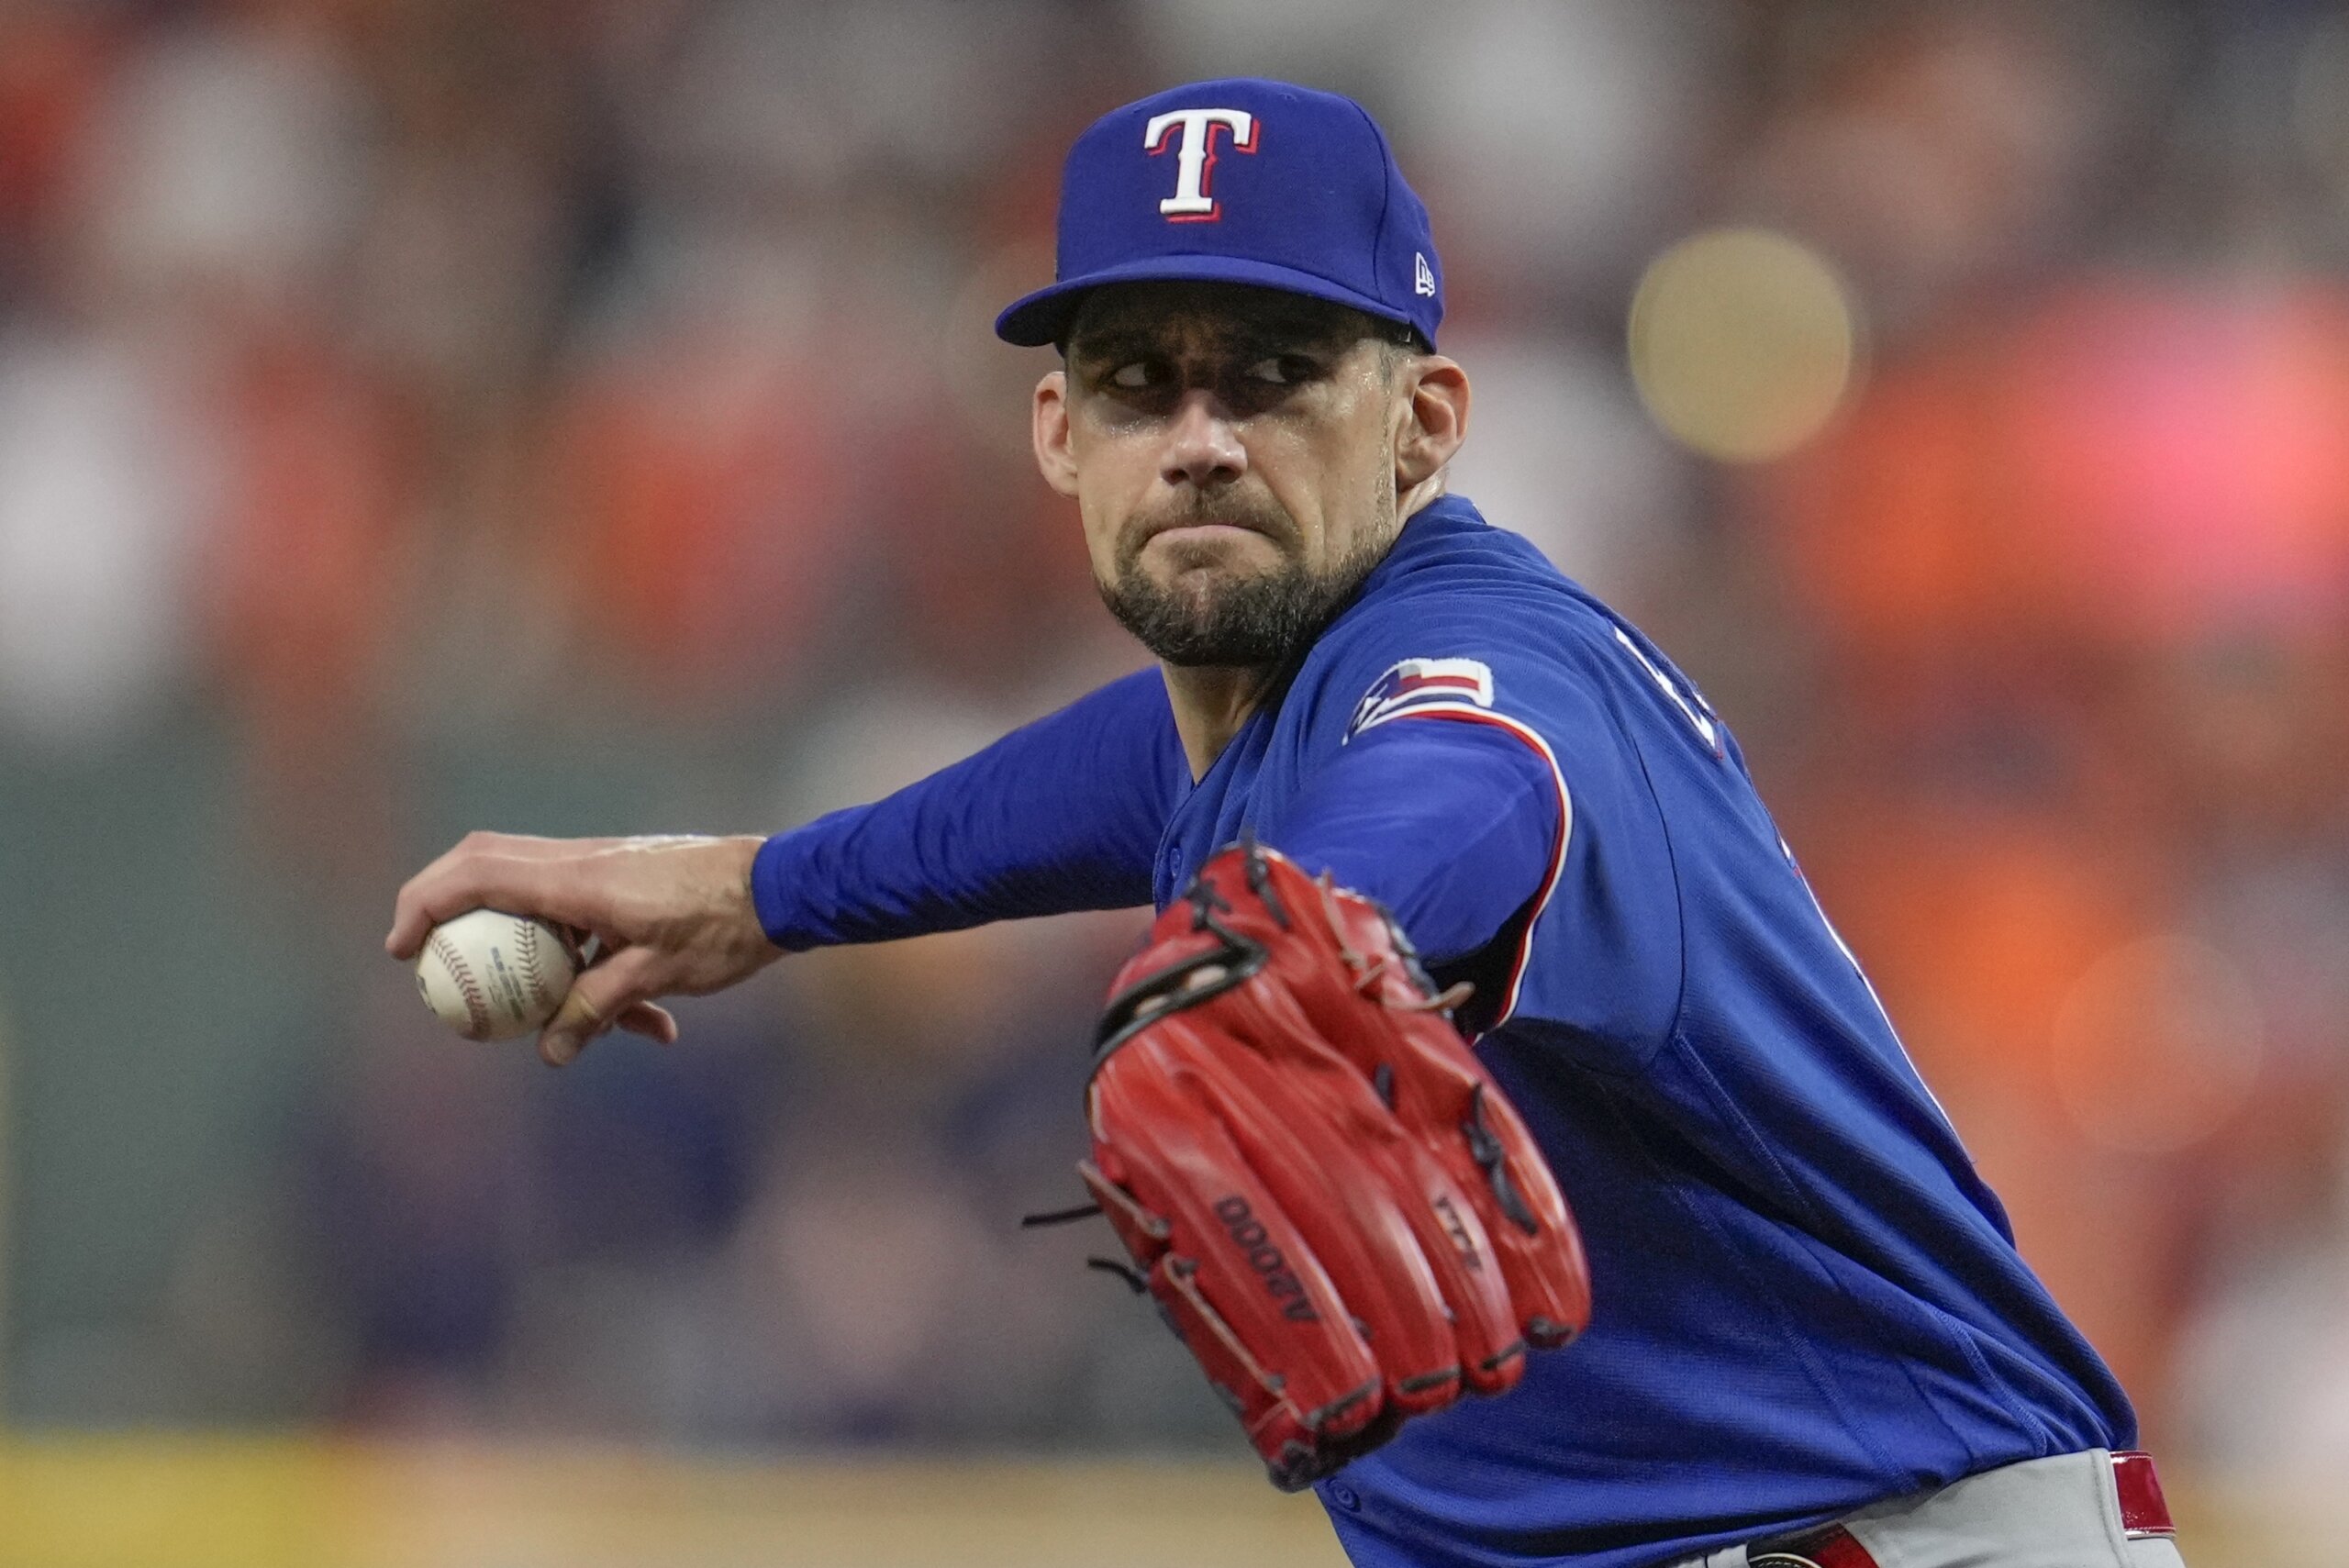 Rangers 8, Astros 3: This is not the 1999 I remember - The